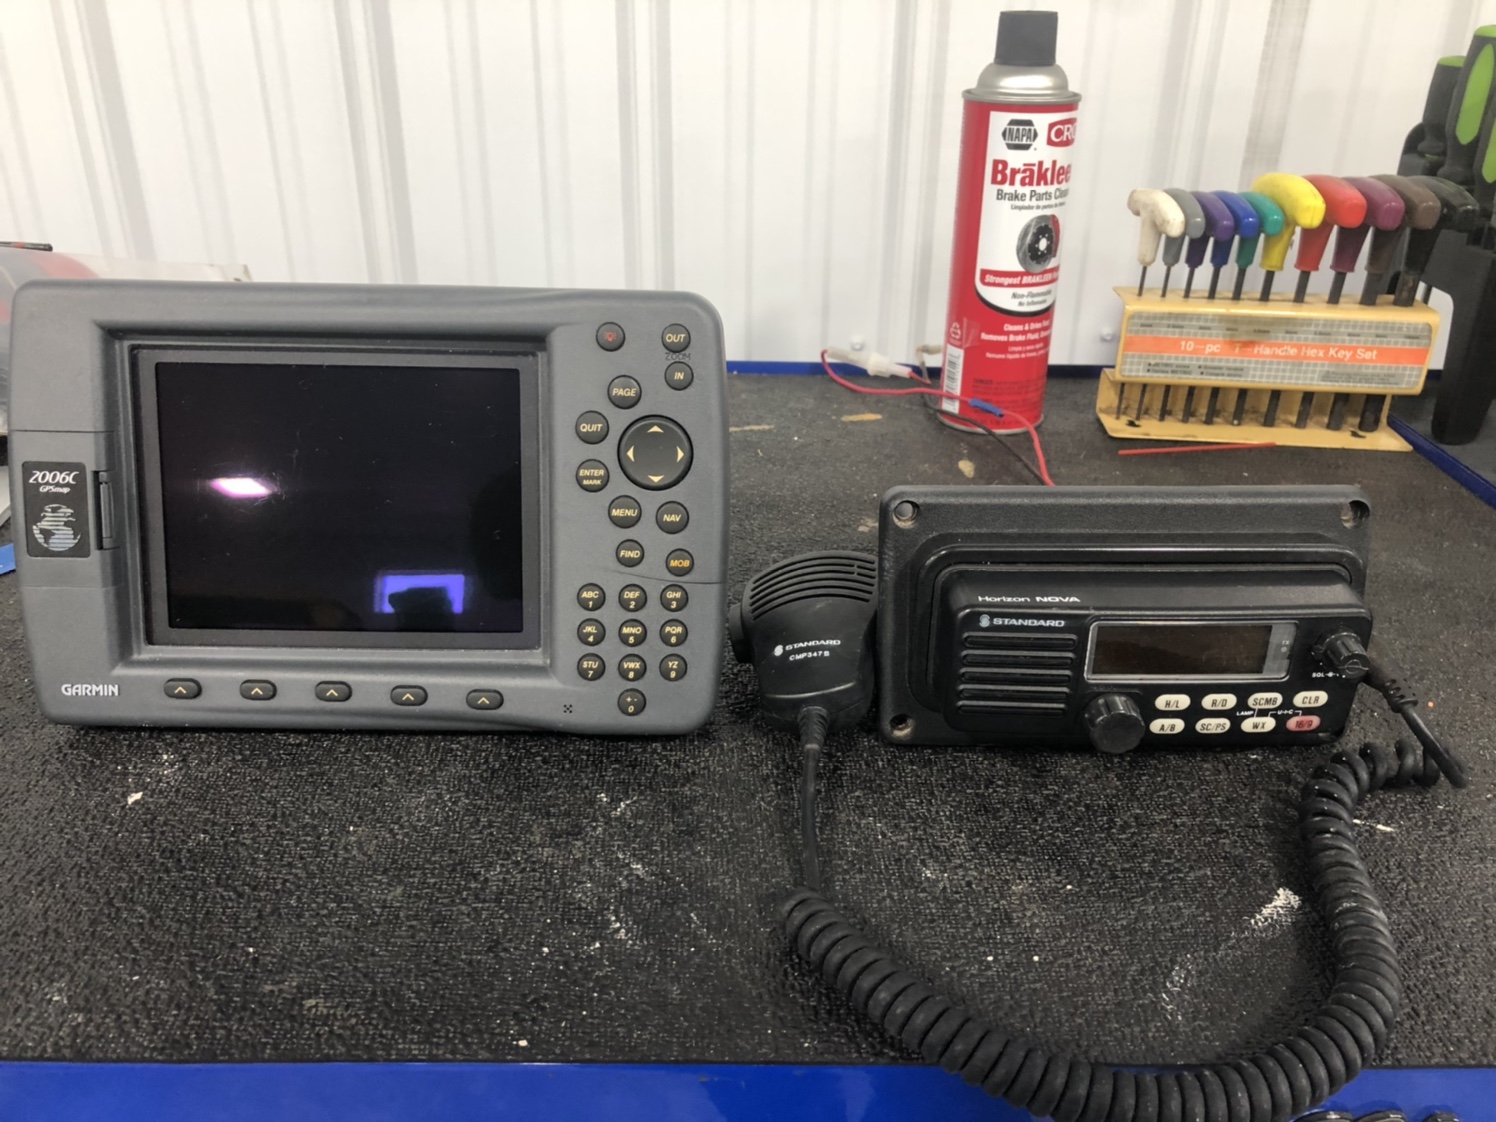 Used Garmin GPS 2006c and standard VHF radio - Classifieds - Buy, Sell, Trade or Rent - Ontario United - Lake Ontario's Largest Fishing & Hunting Community - New York and Ontario Canada